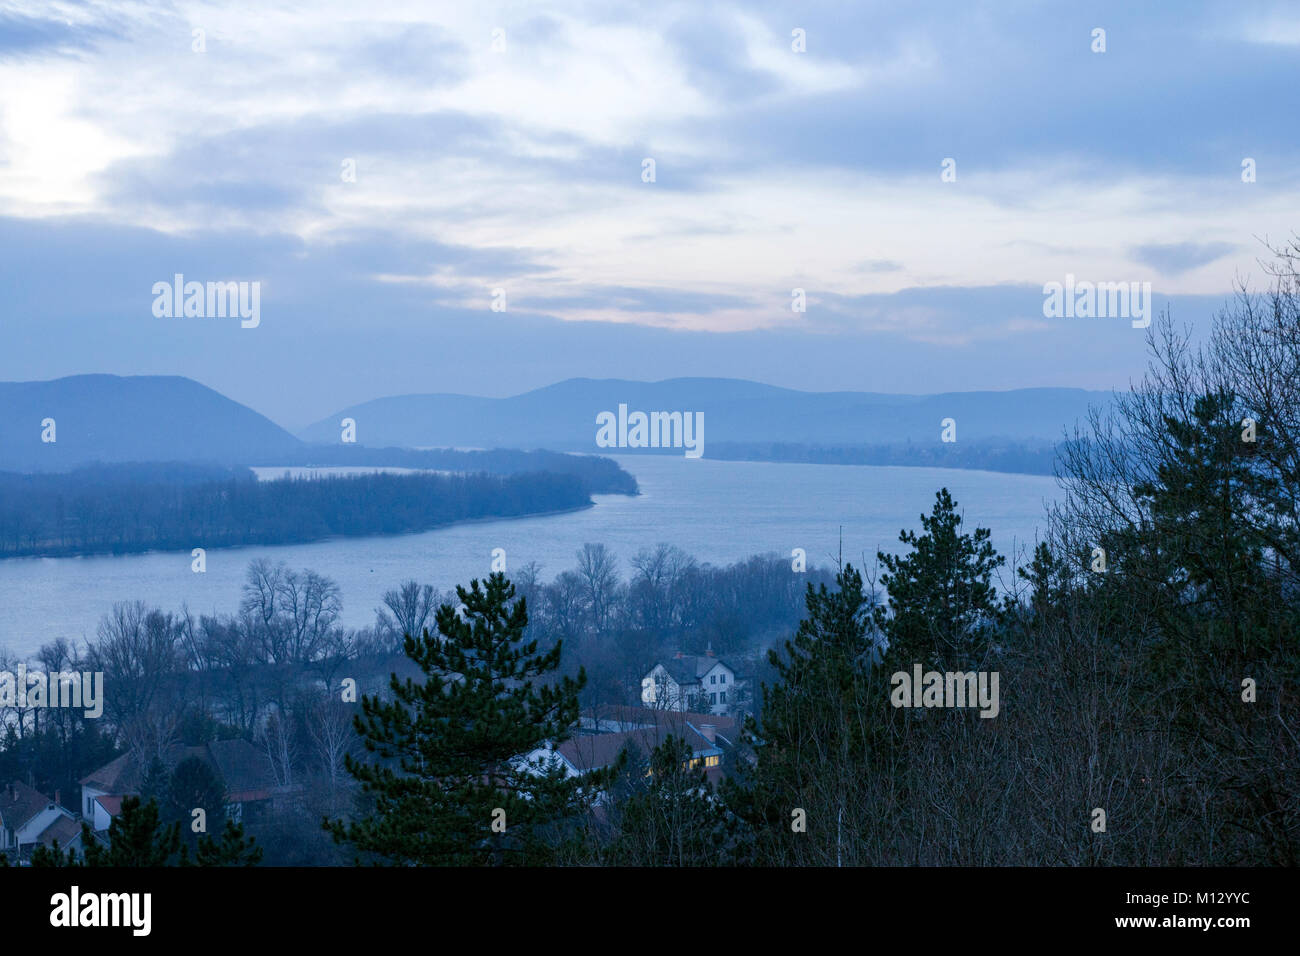 Danube bend on a winter evening at Zebegeny, Hungary. Stock Photo